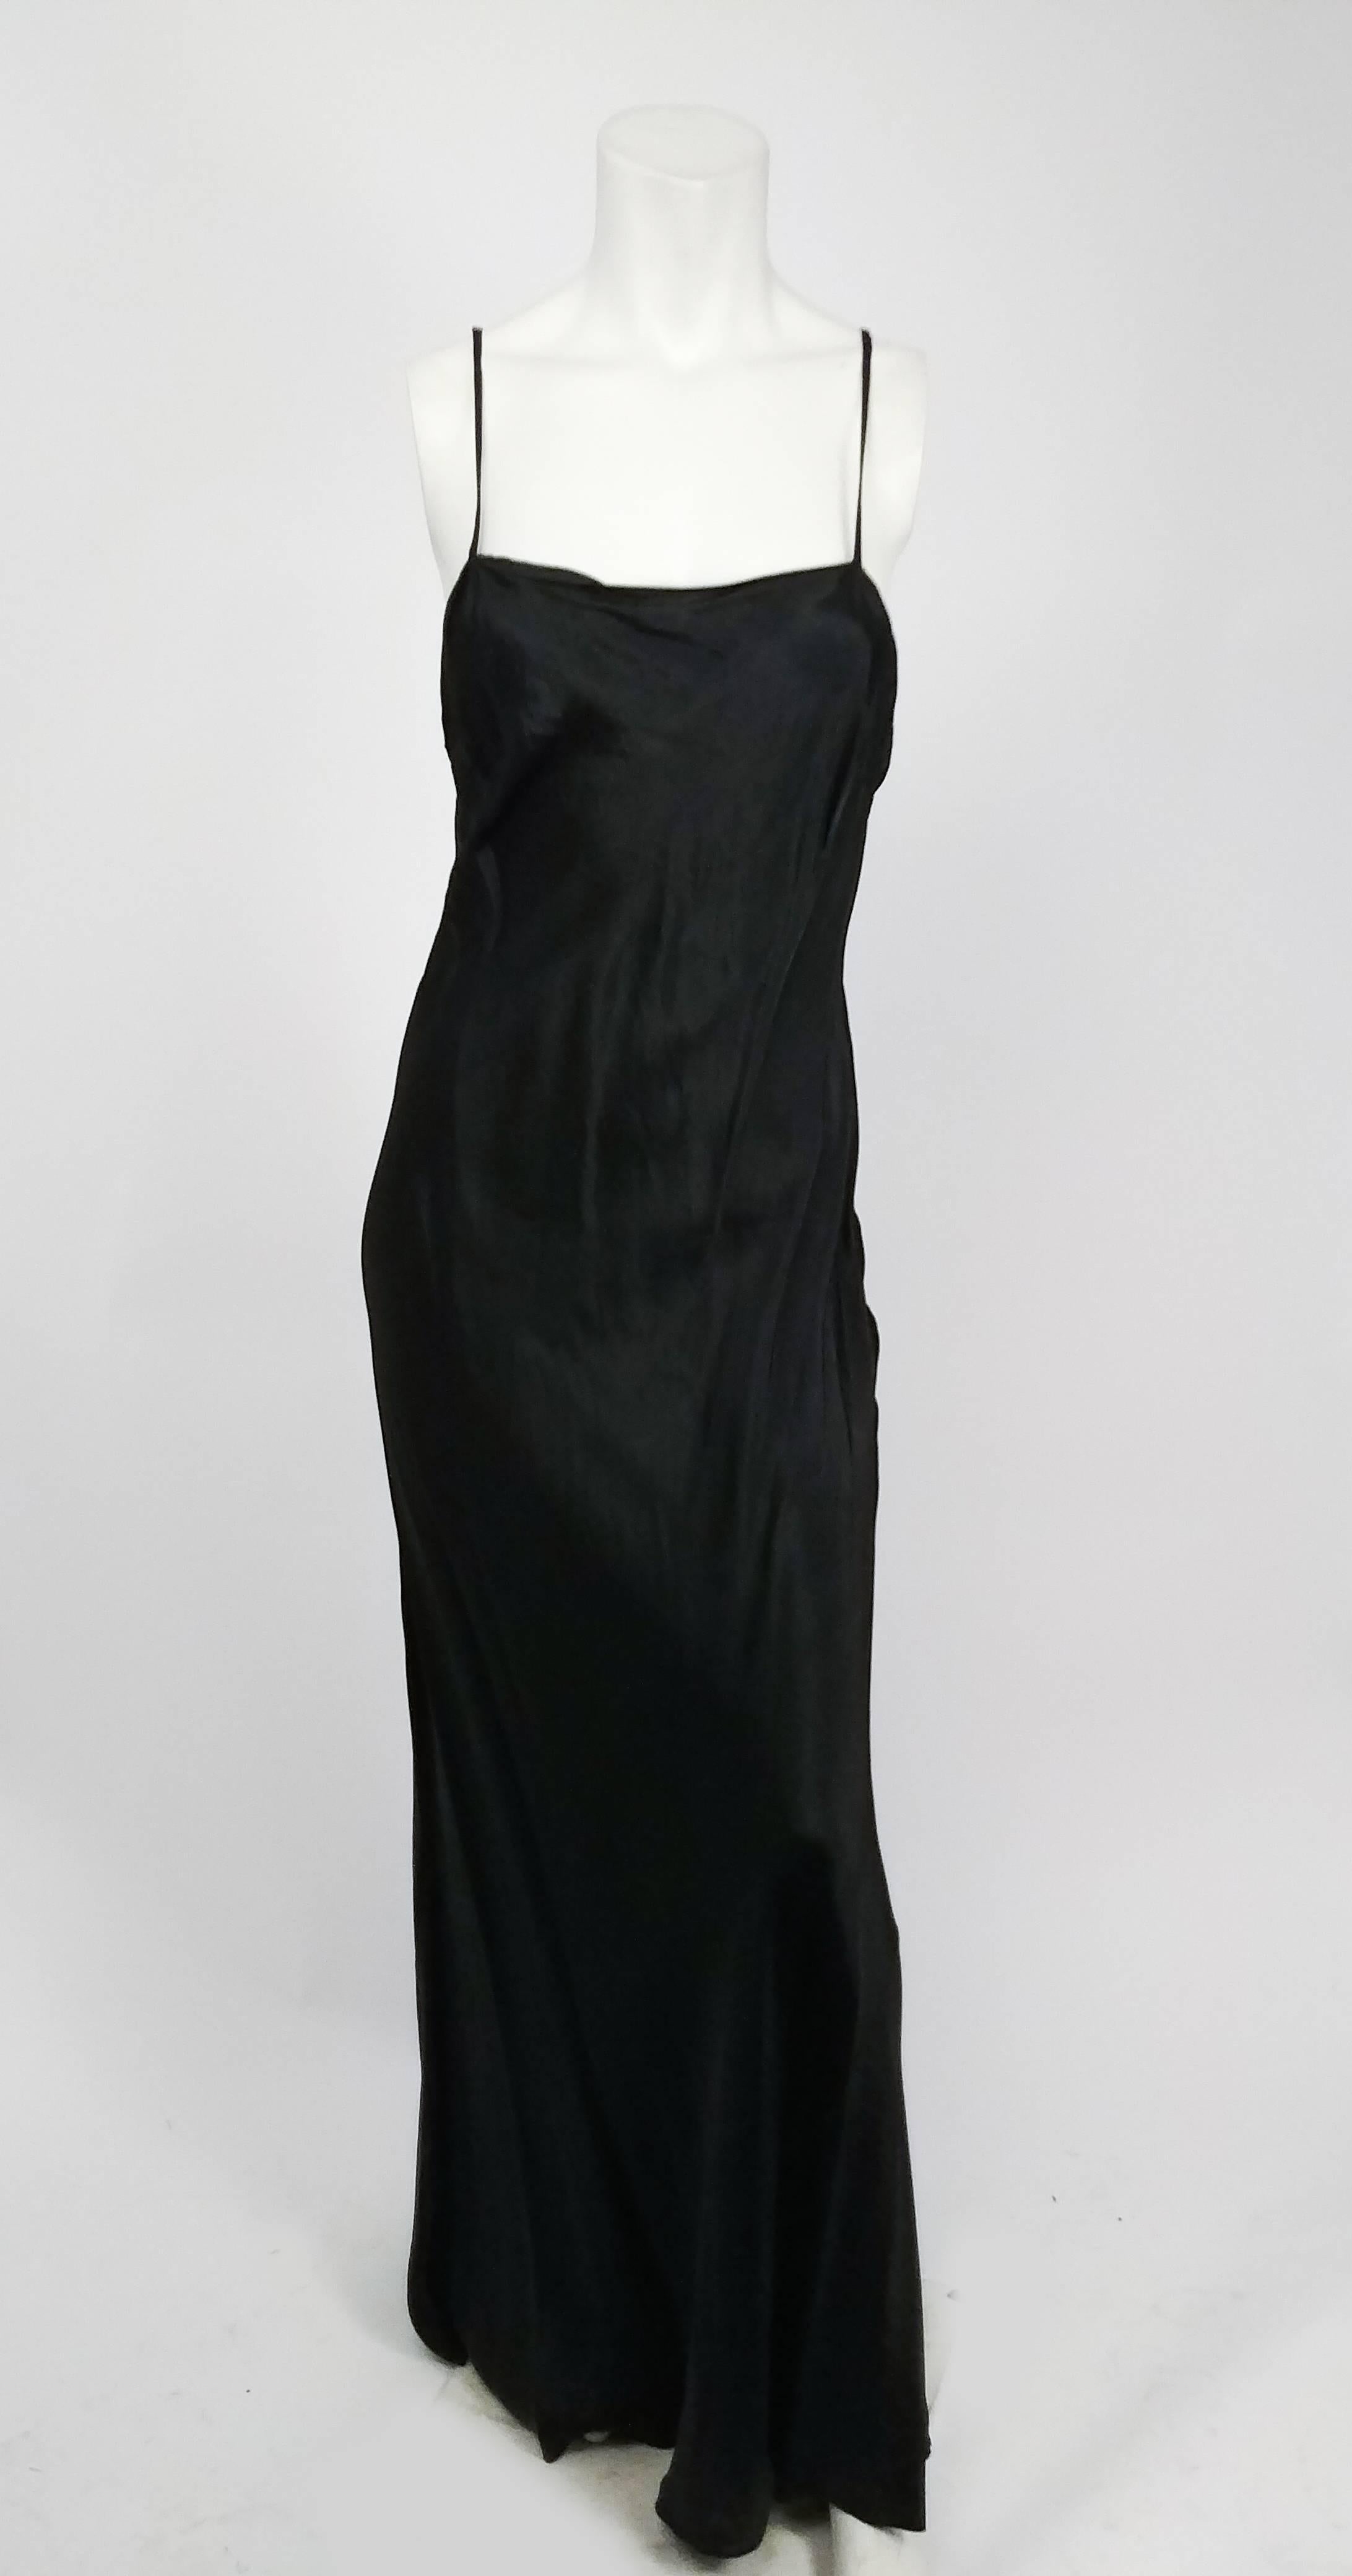 1930s Black Evening Gown with Rhinestone Detailing 1